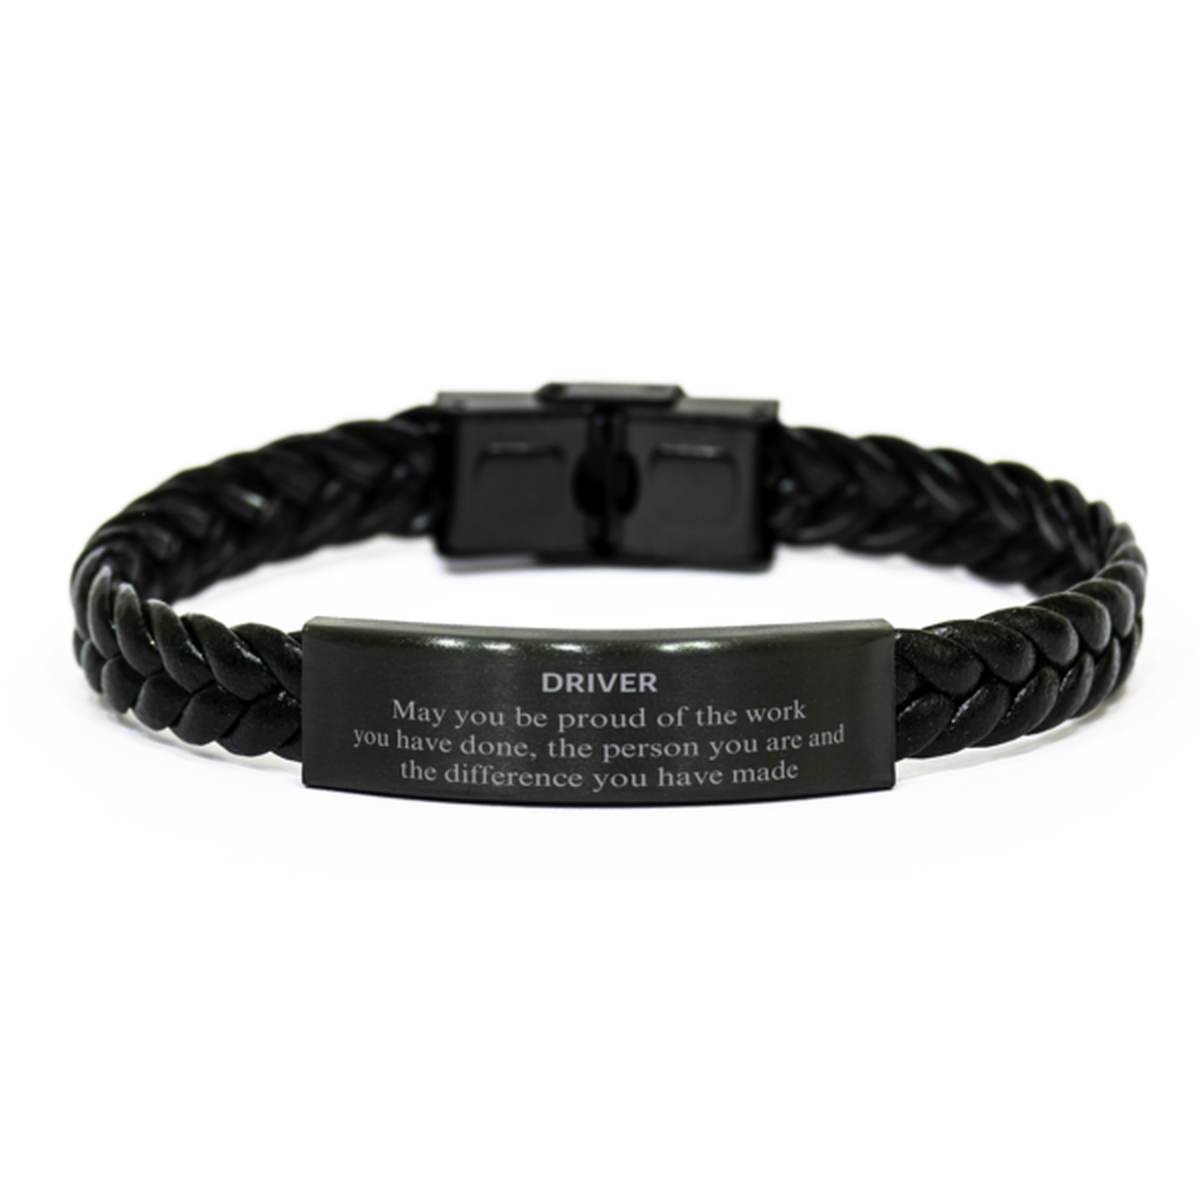 Driver May you be proud of the work you have done, Retirement Driver Braided Leather Bracelet for Colleague Appreciation Gifts Amazing for Driver